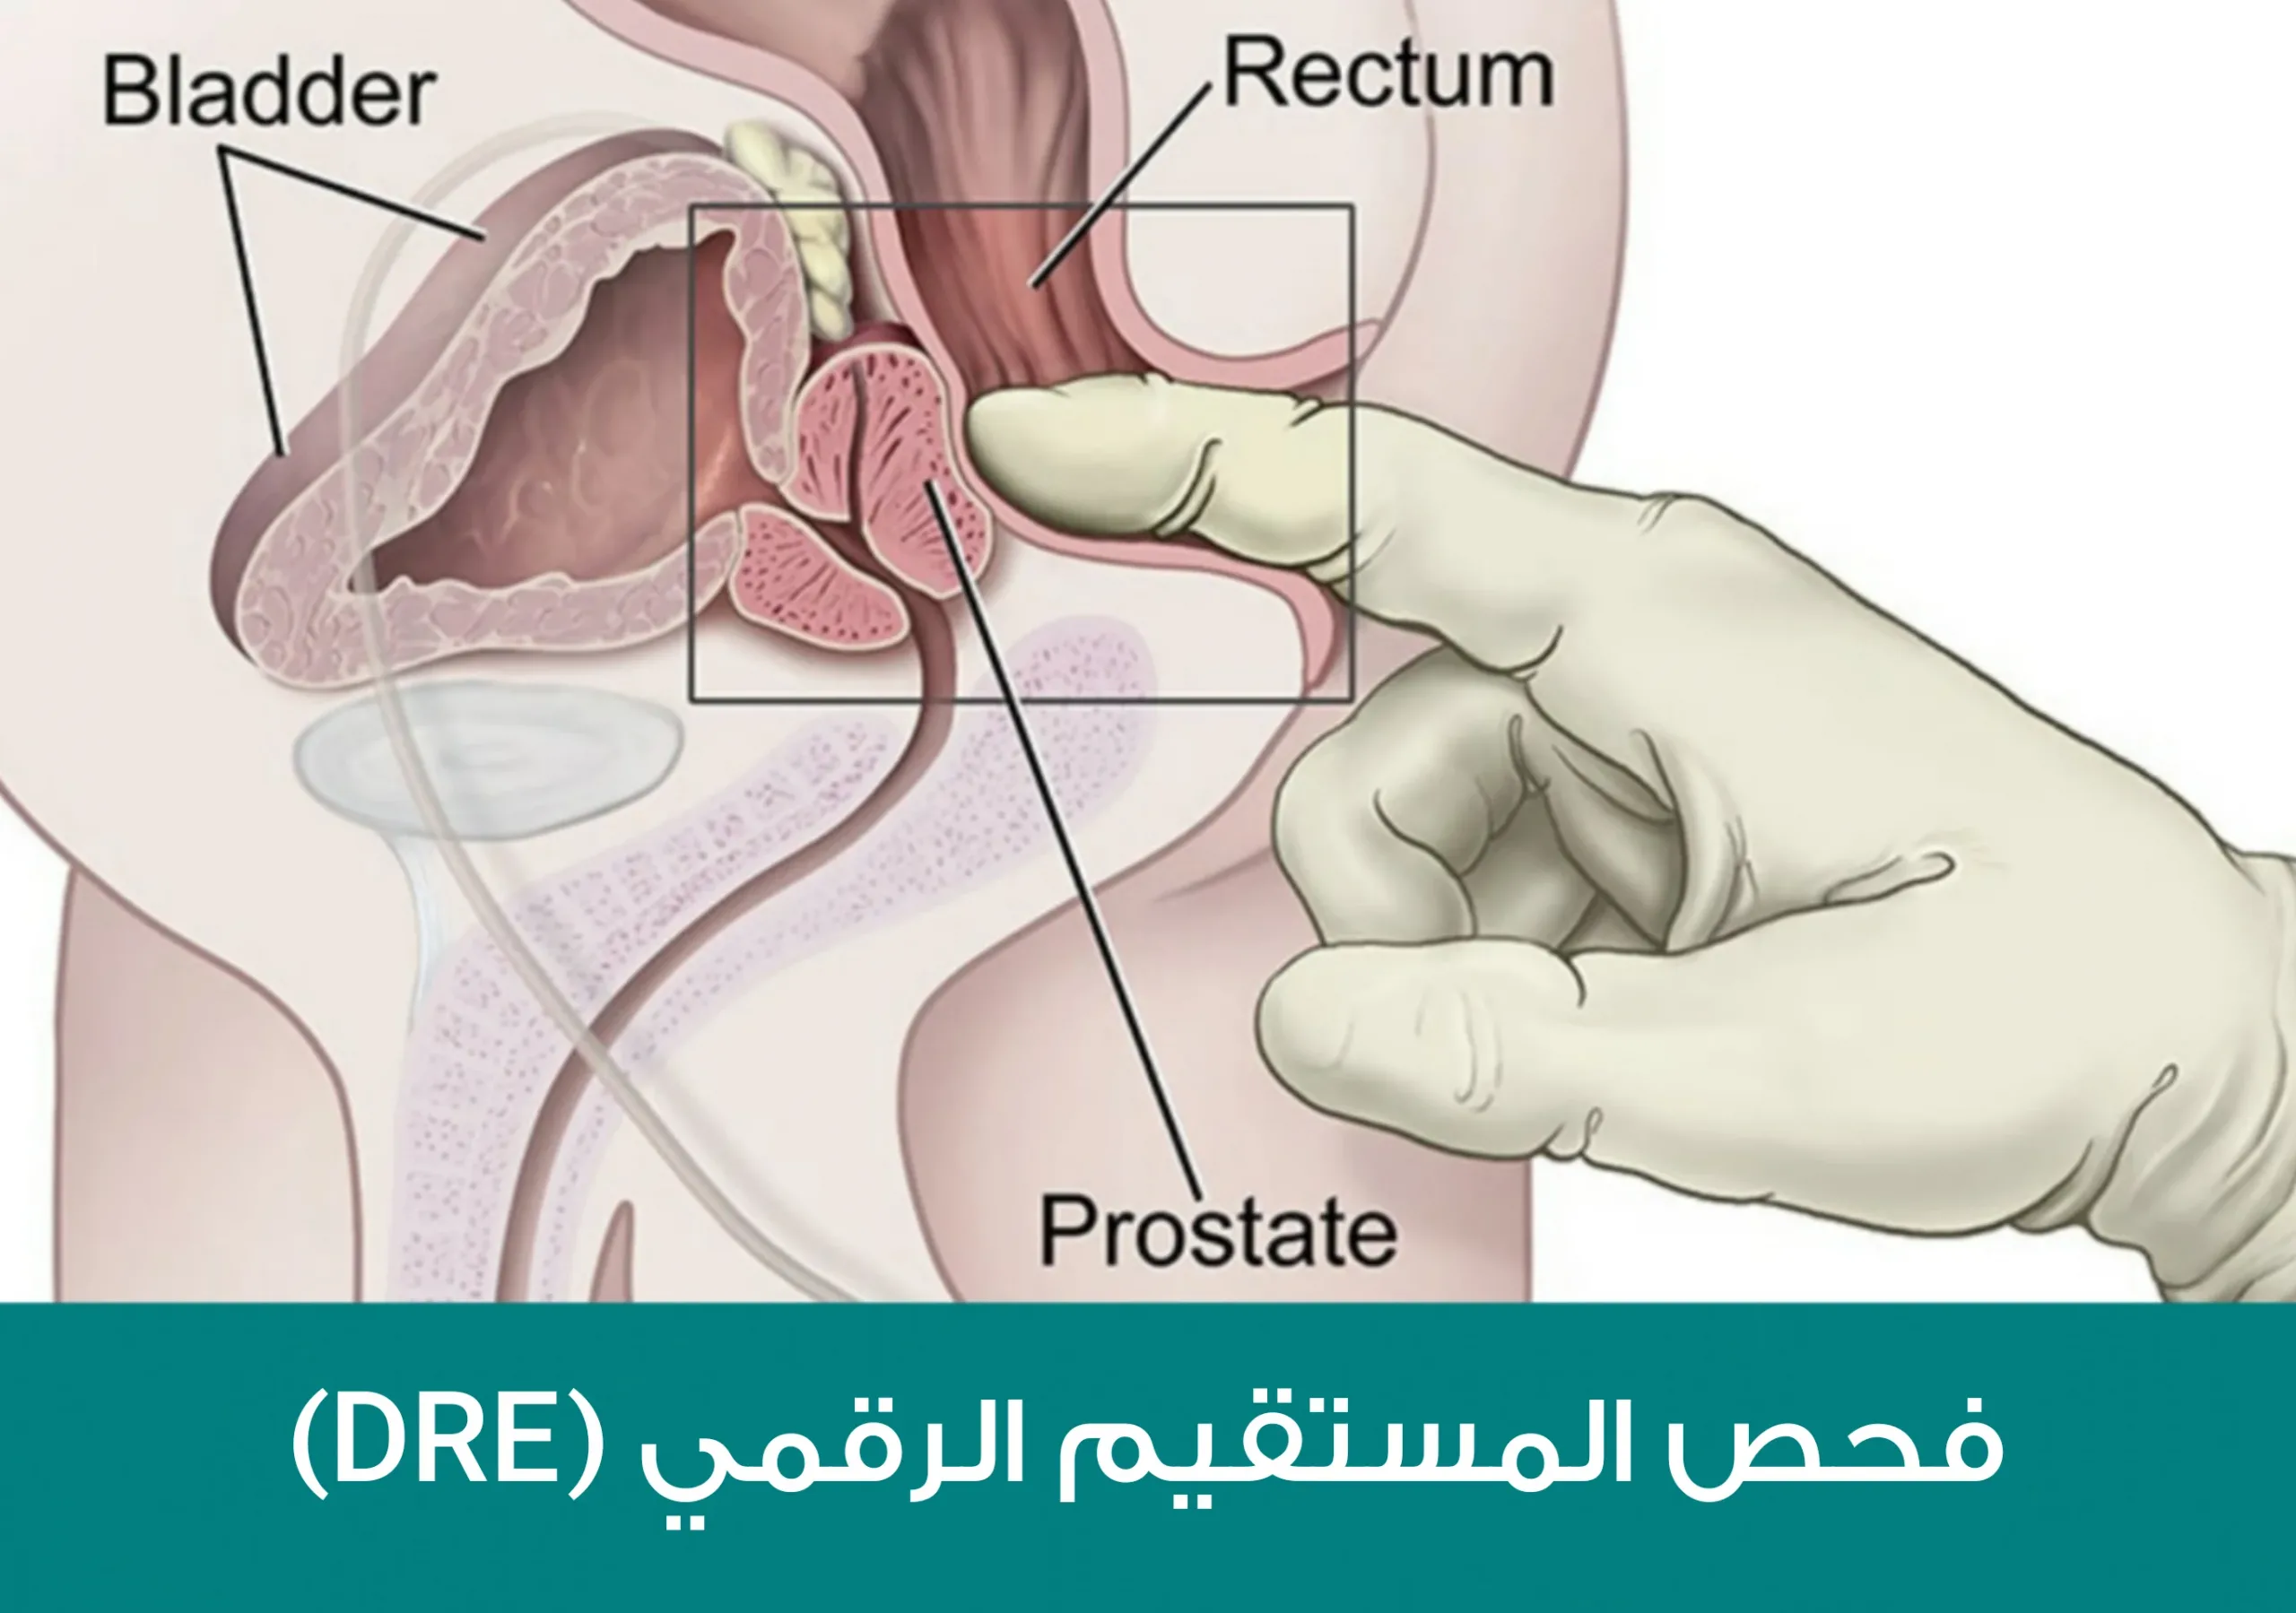 Digital Rectal Examination (DRE), also known as palpation